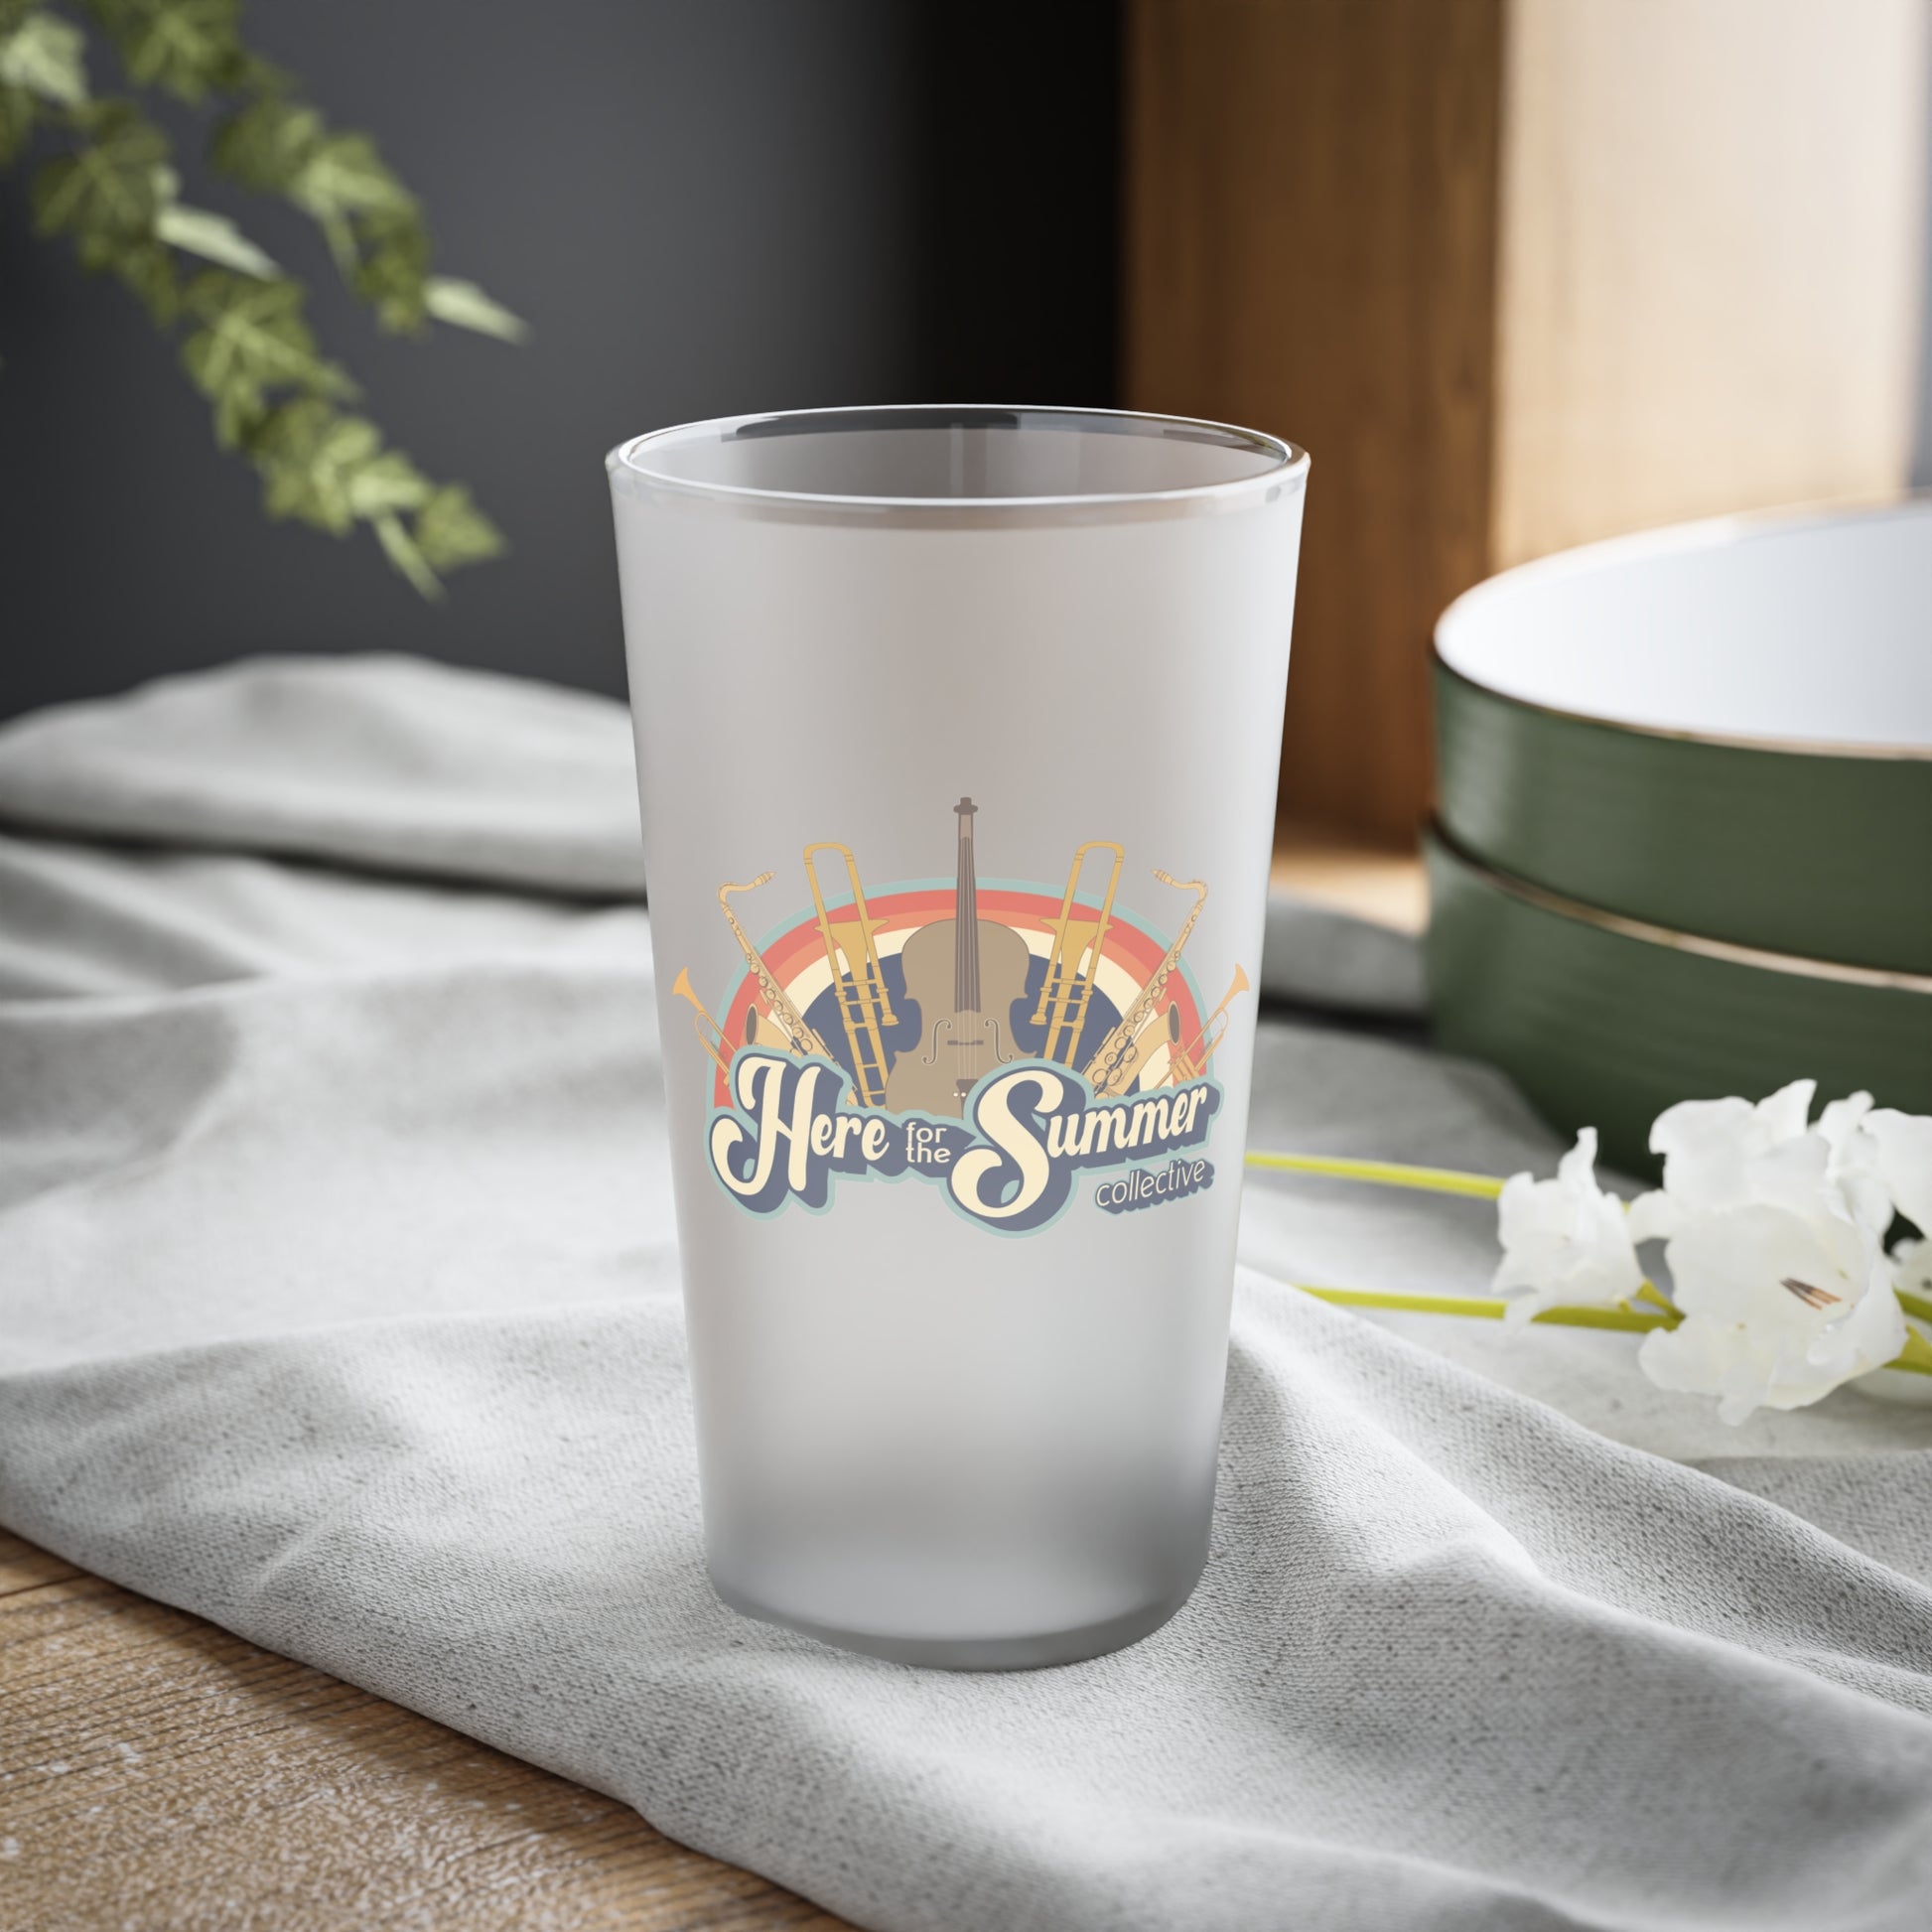 Custom 16 oz Frosted Beer Glass, Personalized Frosted Beer Mug